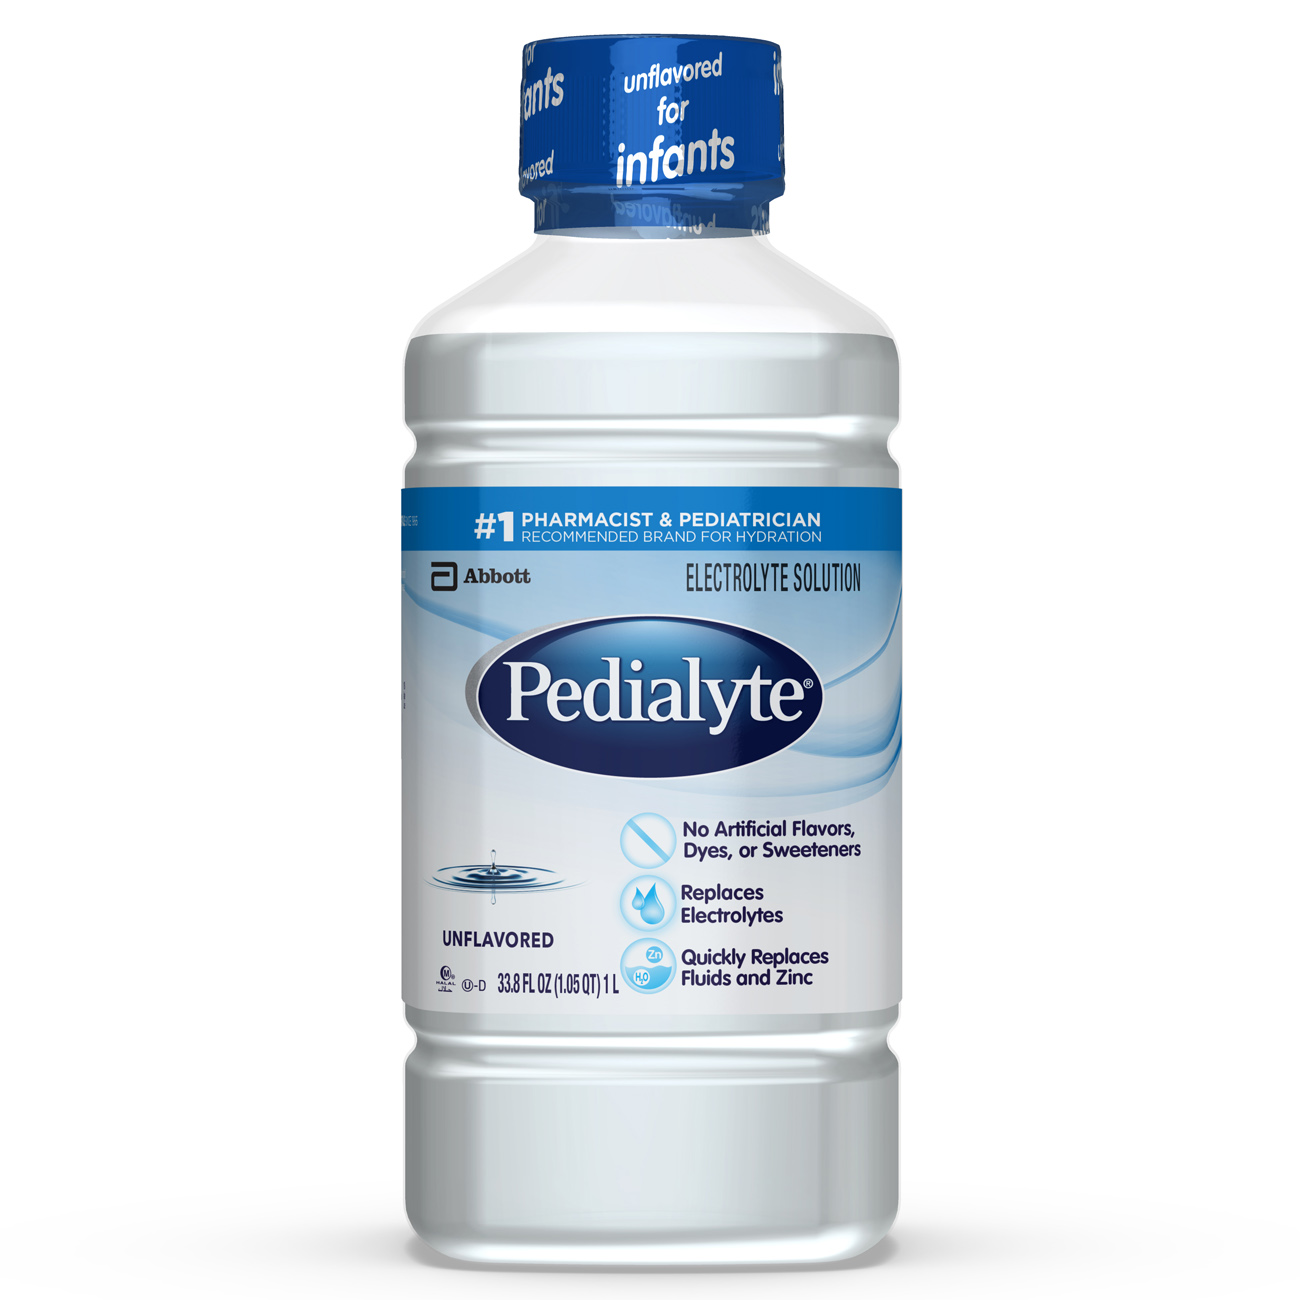 Pedialyte Electrolyte Solution, Unflavored, Hydration Drink, 1 Liter - image 1 of 10